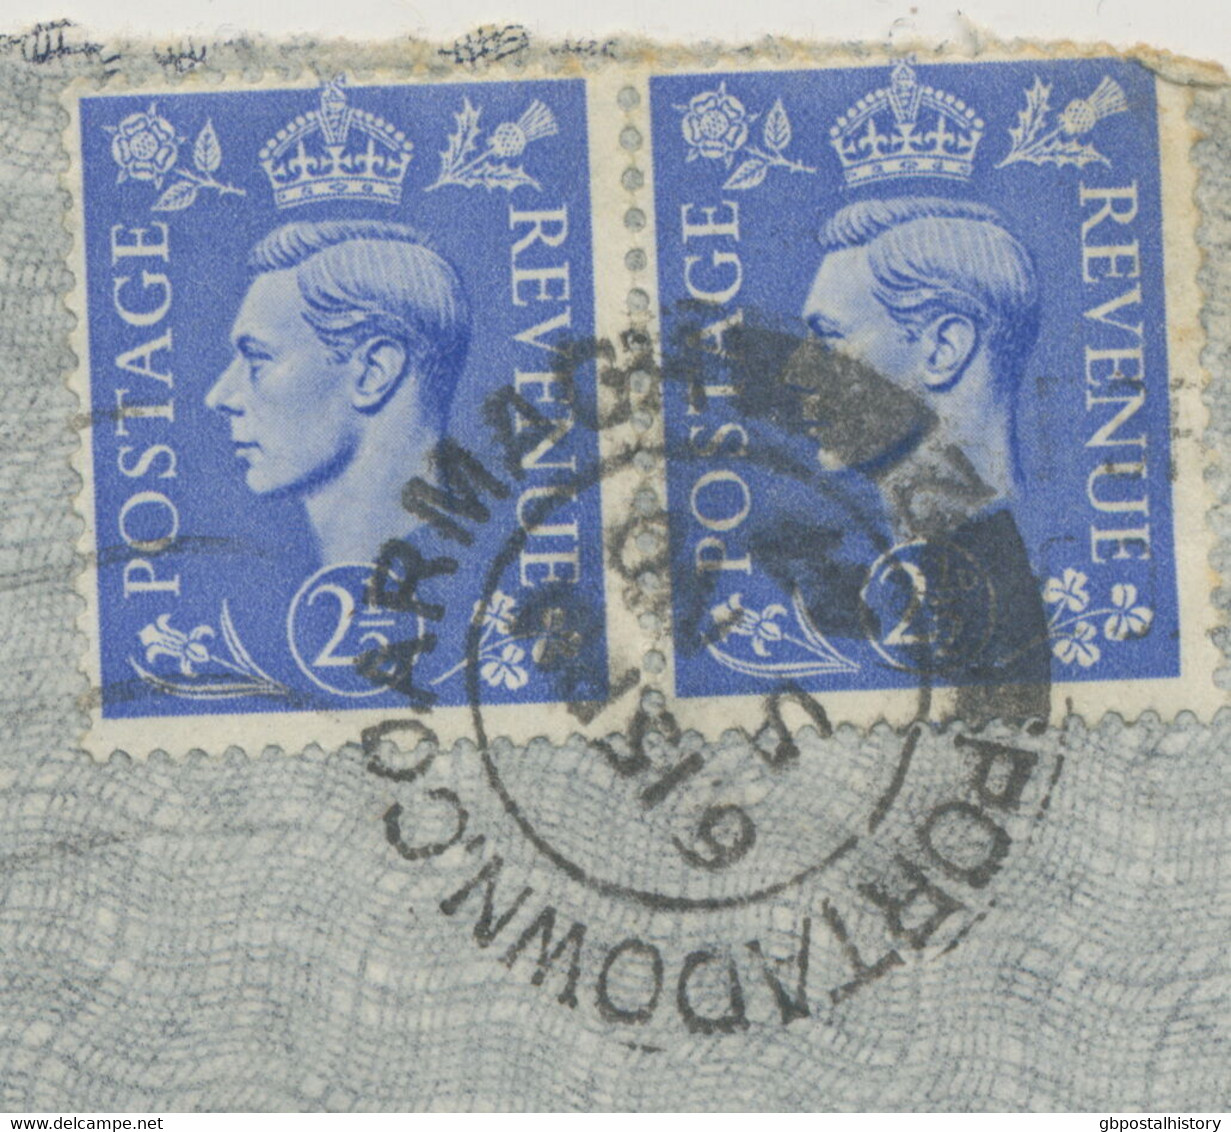 GB „PORTADOWN.CO.ARMAGH / 2“ Double Ring (25 Mm) Airmail Cover To Switzerland - Irlanda Del Nord